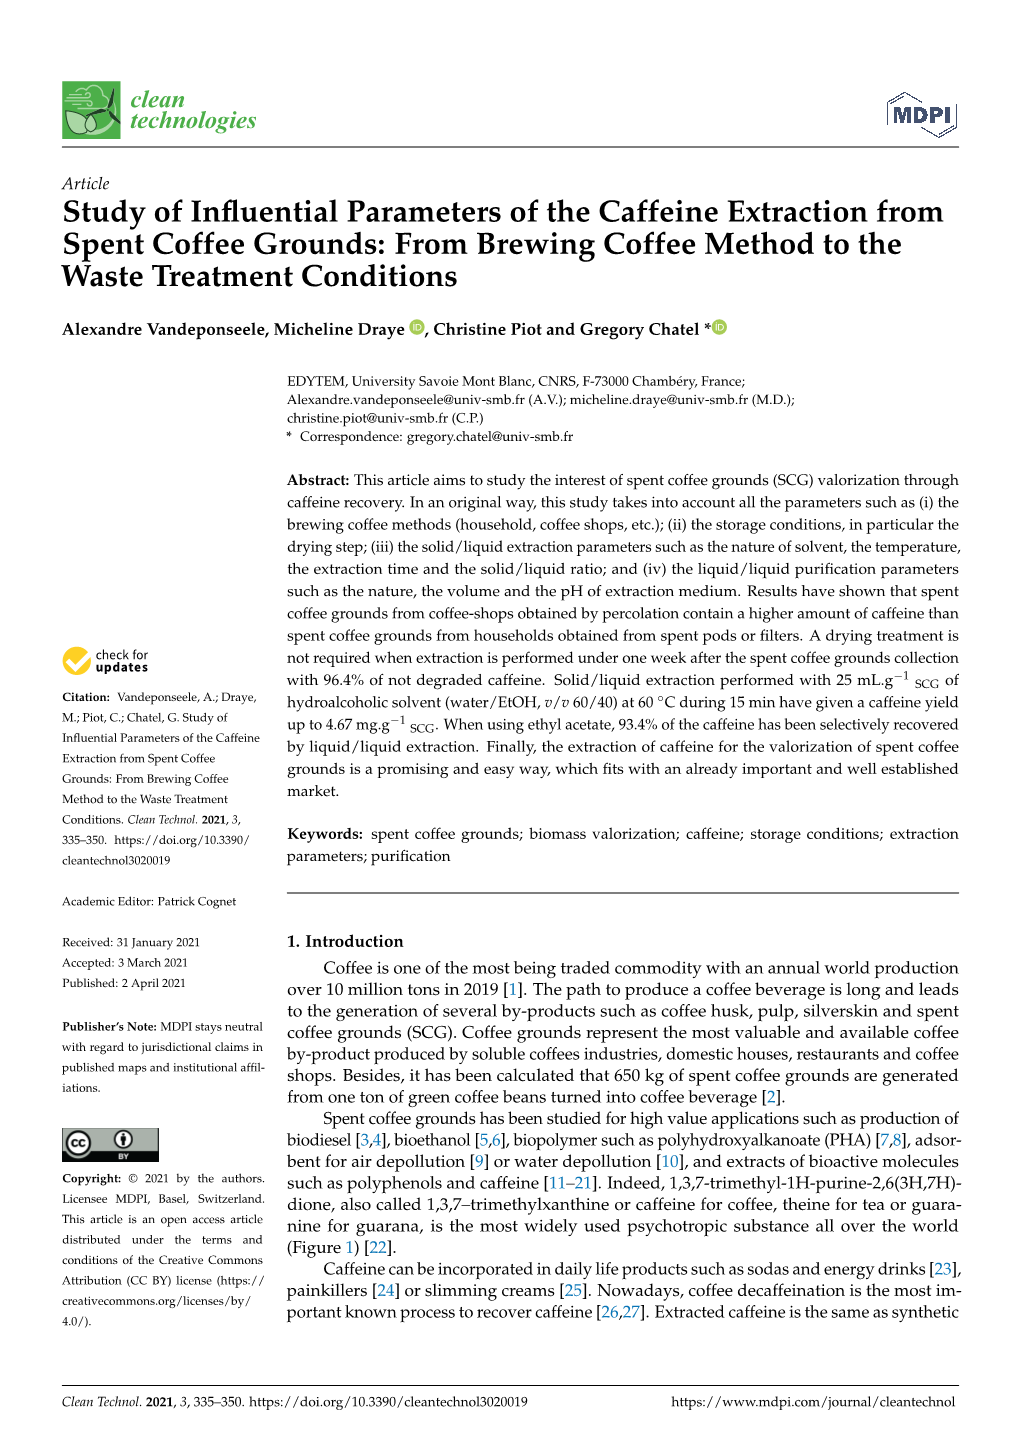 Study of Influential Parameters of the Caffeine Extraction From